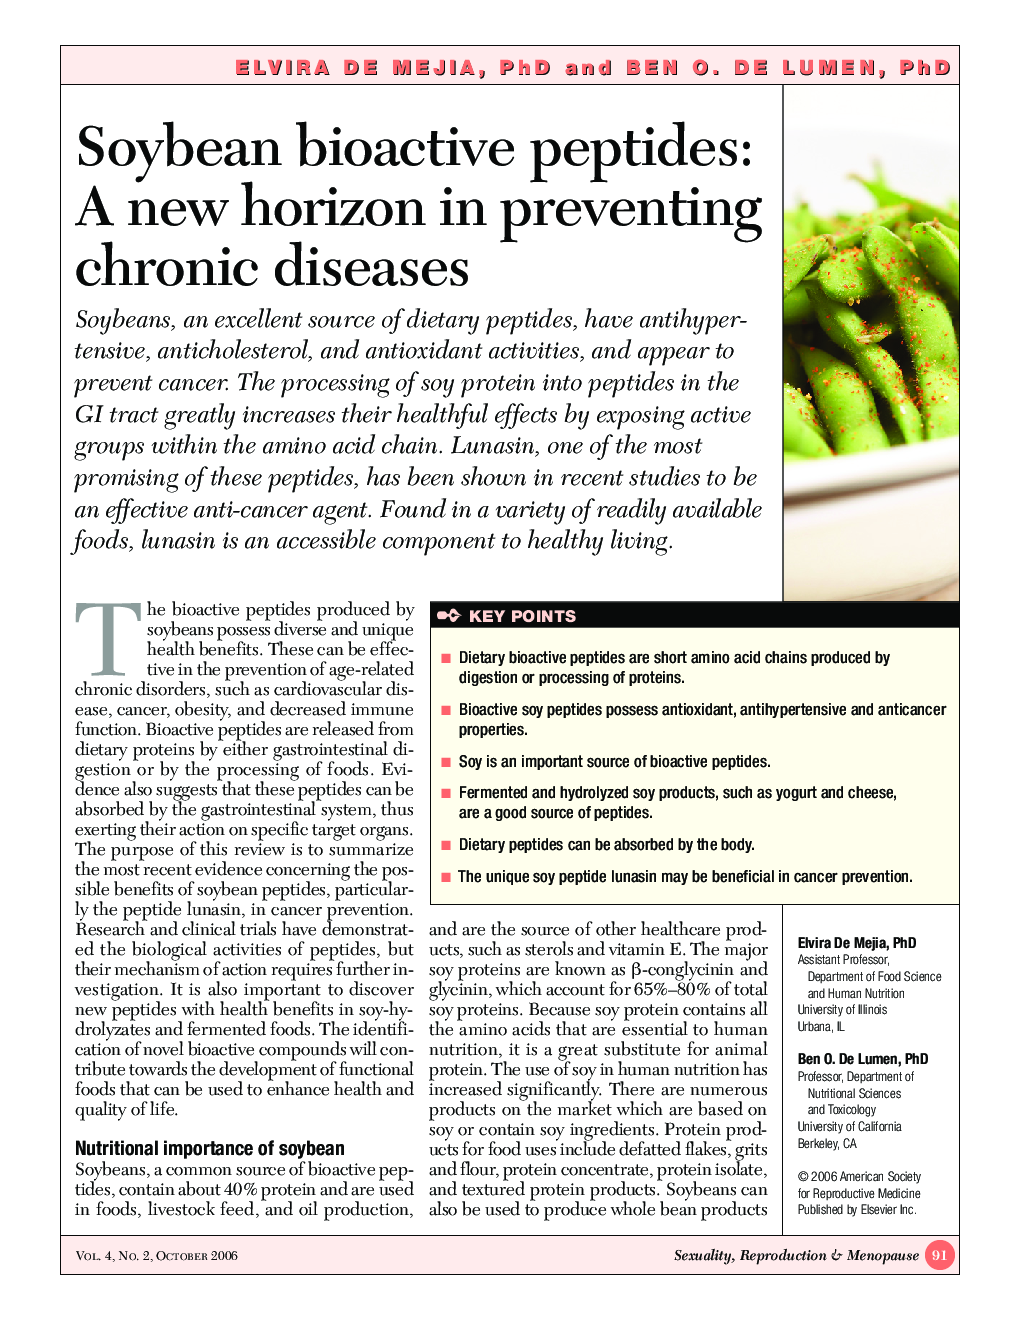 Soybean bioactive peptides: A new horizon in preventing chronic diseases